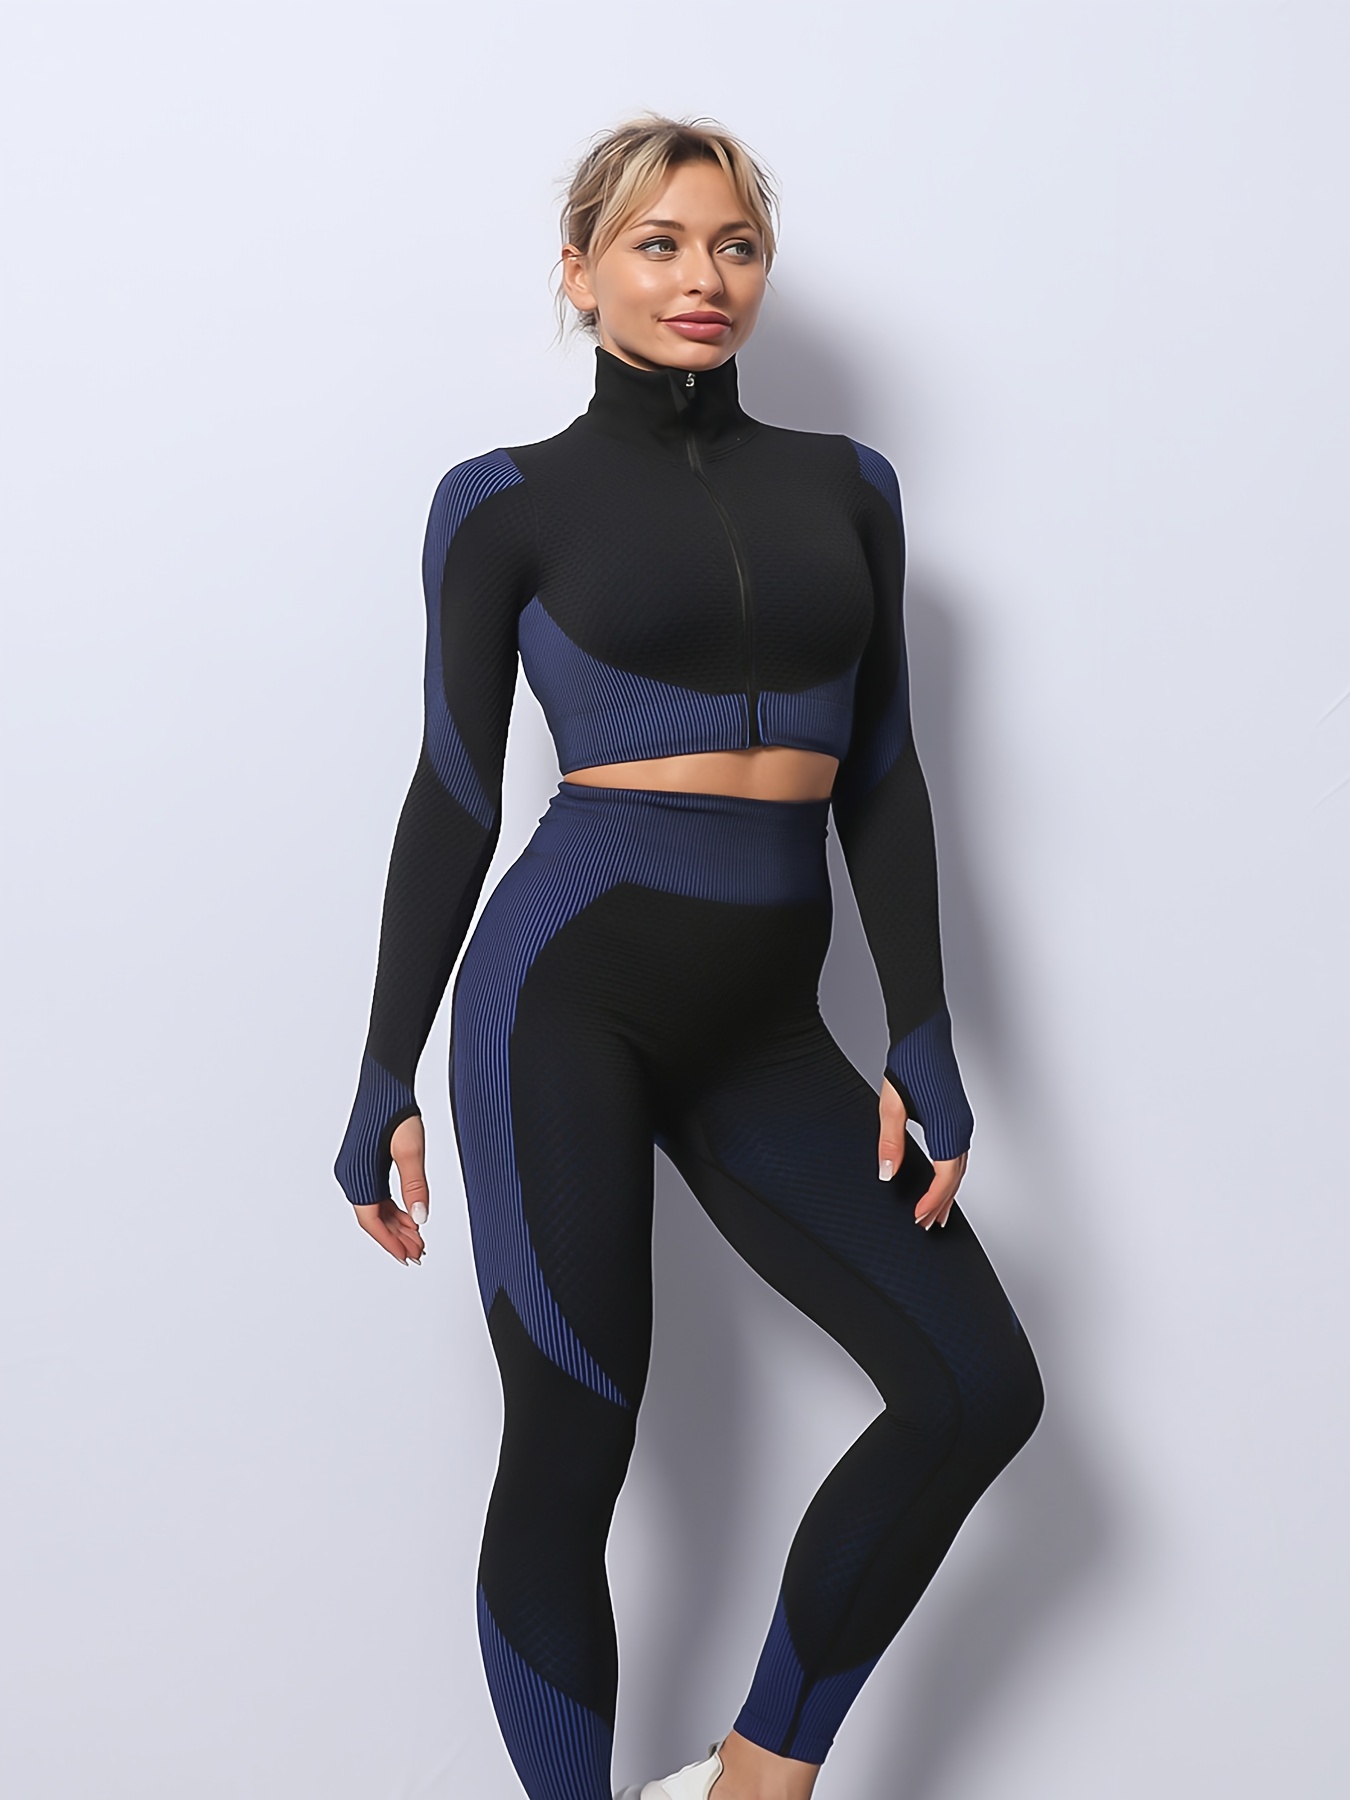 ZIZOCWA Seamless Gym Sports Sets for Women Solid Color Long Sleeve